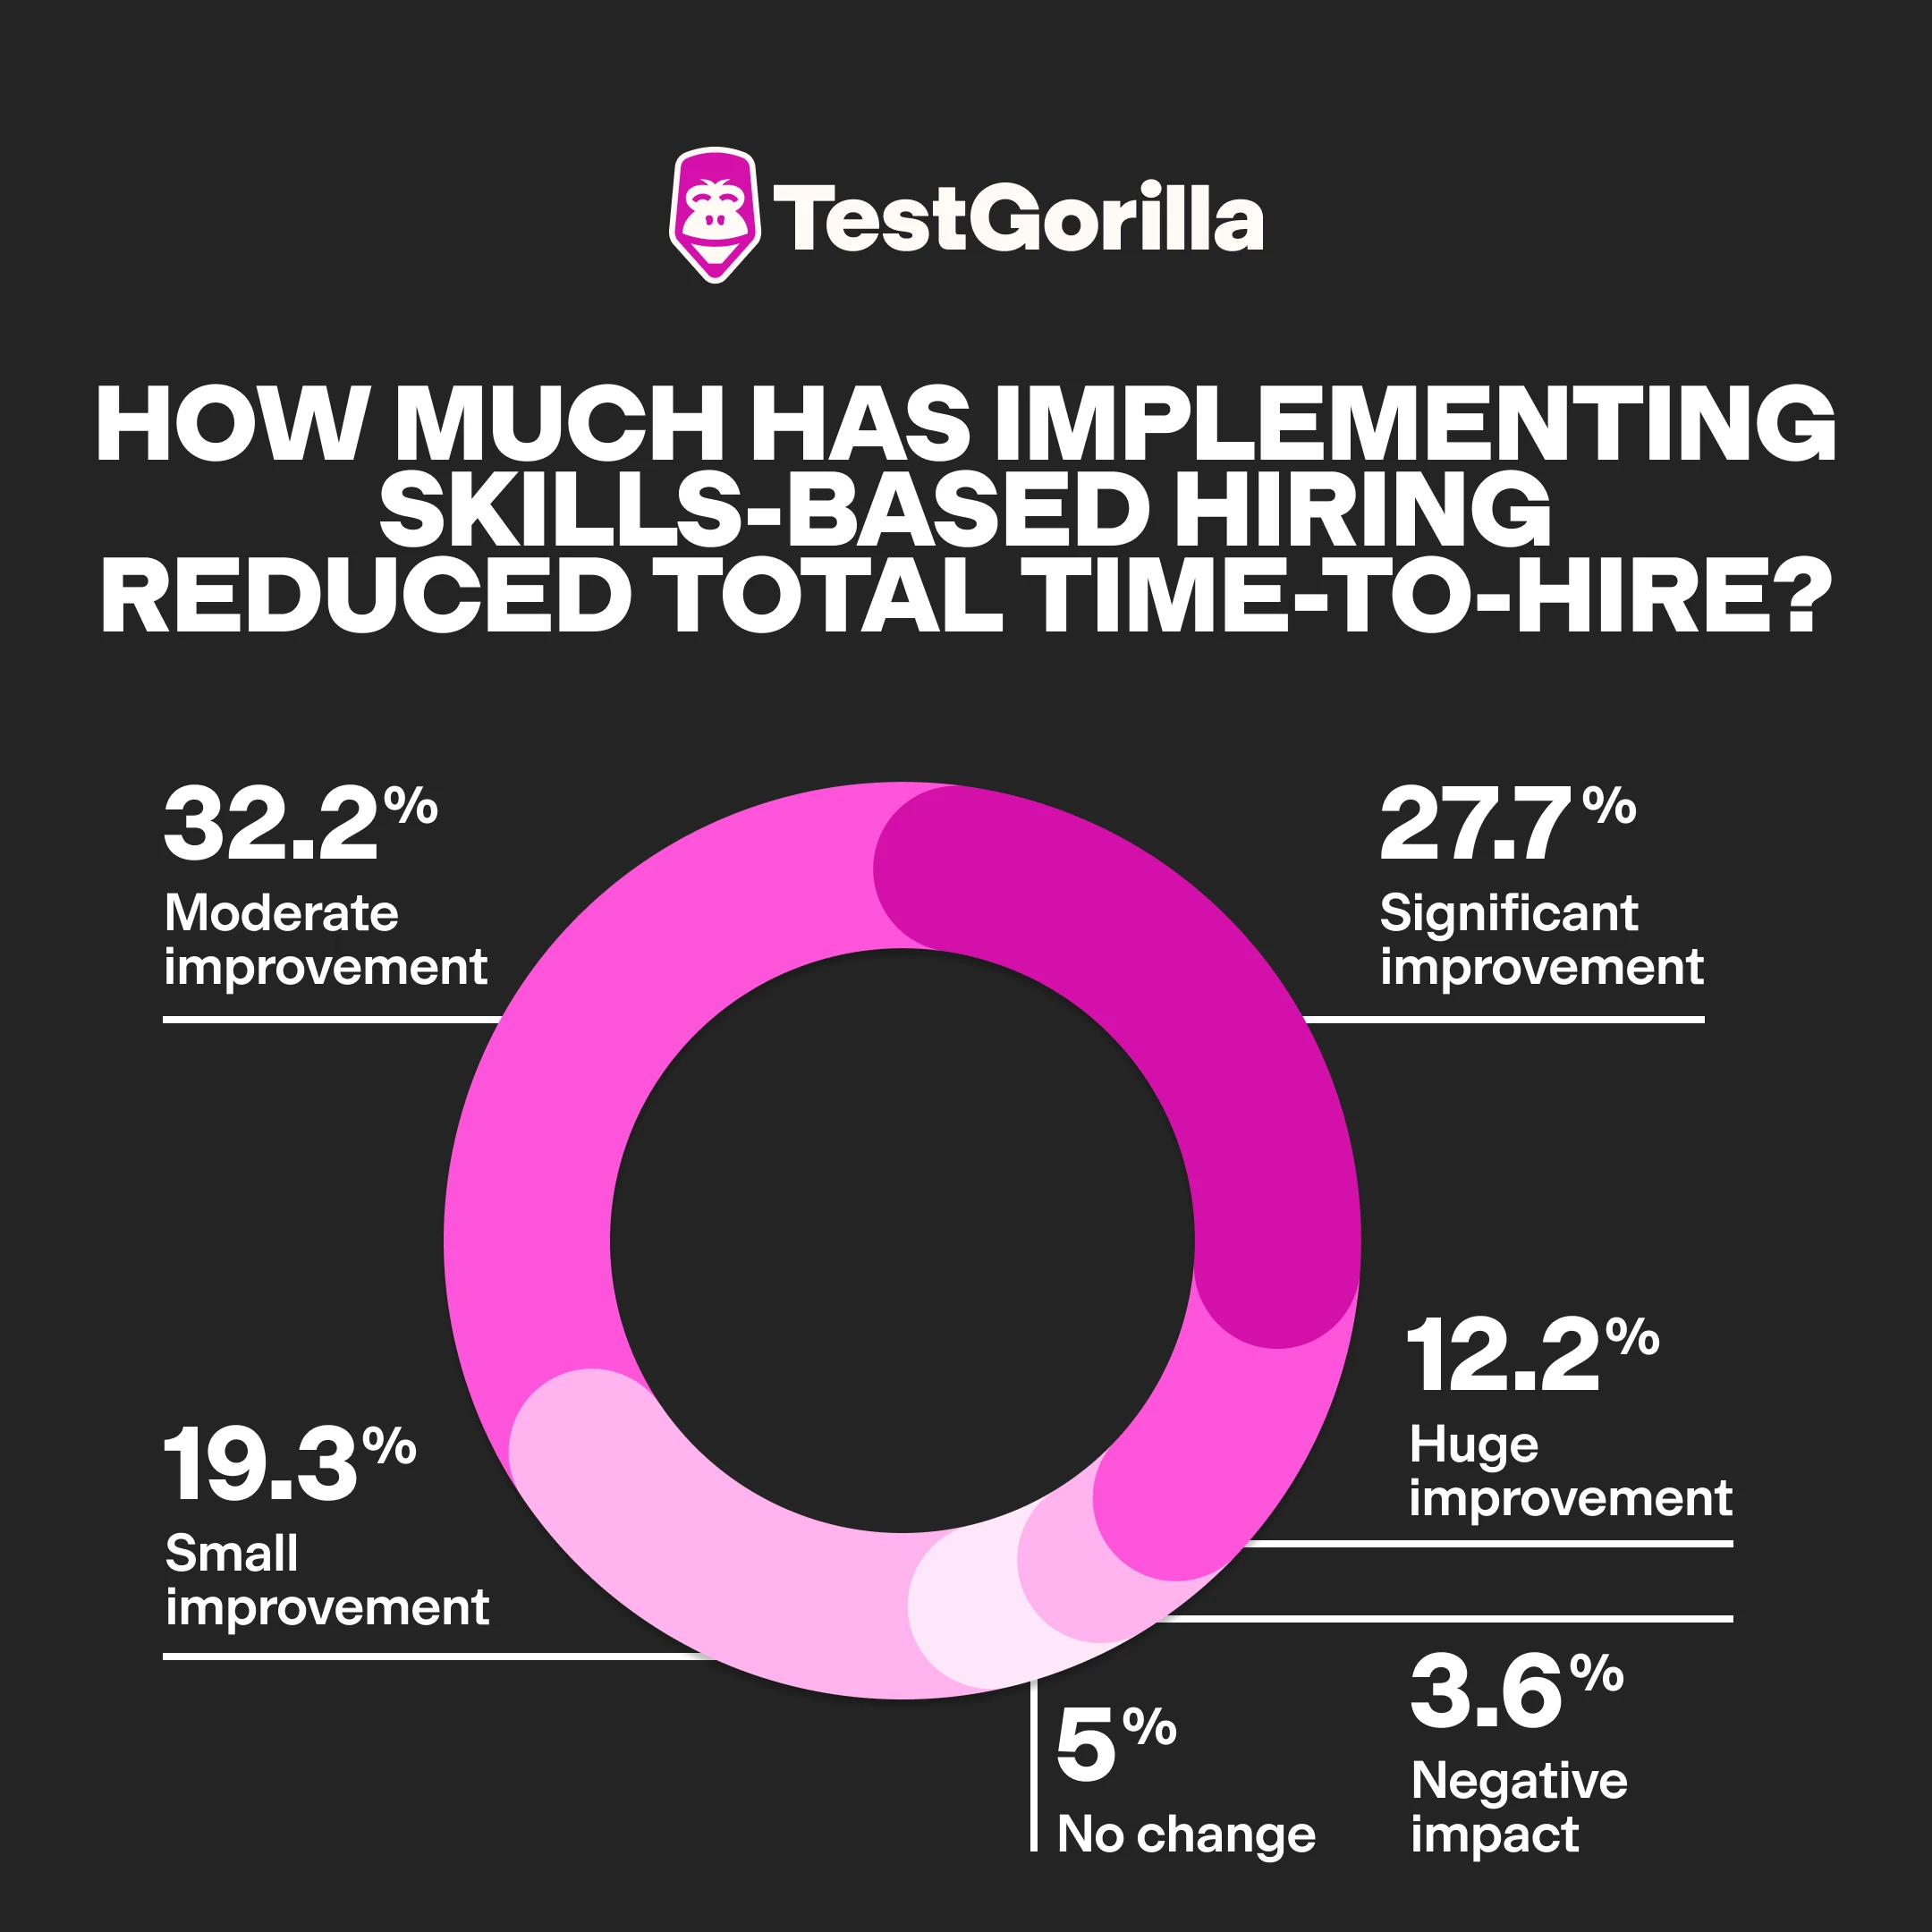 Pie chart showing how many companies have noticed a reduction in time-to-hire after implementing skills-based hiring